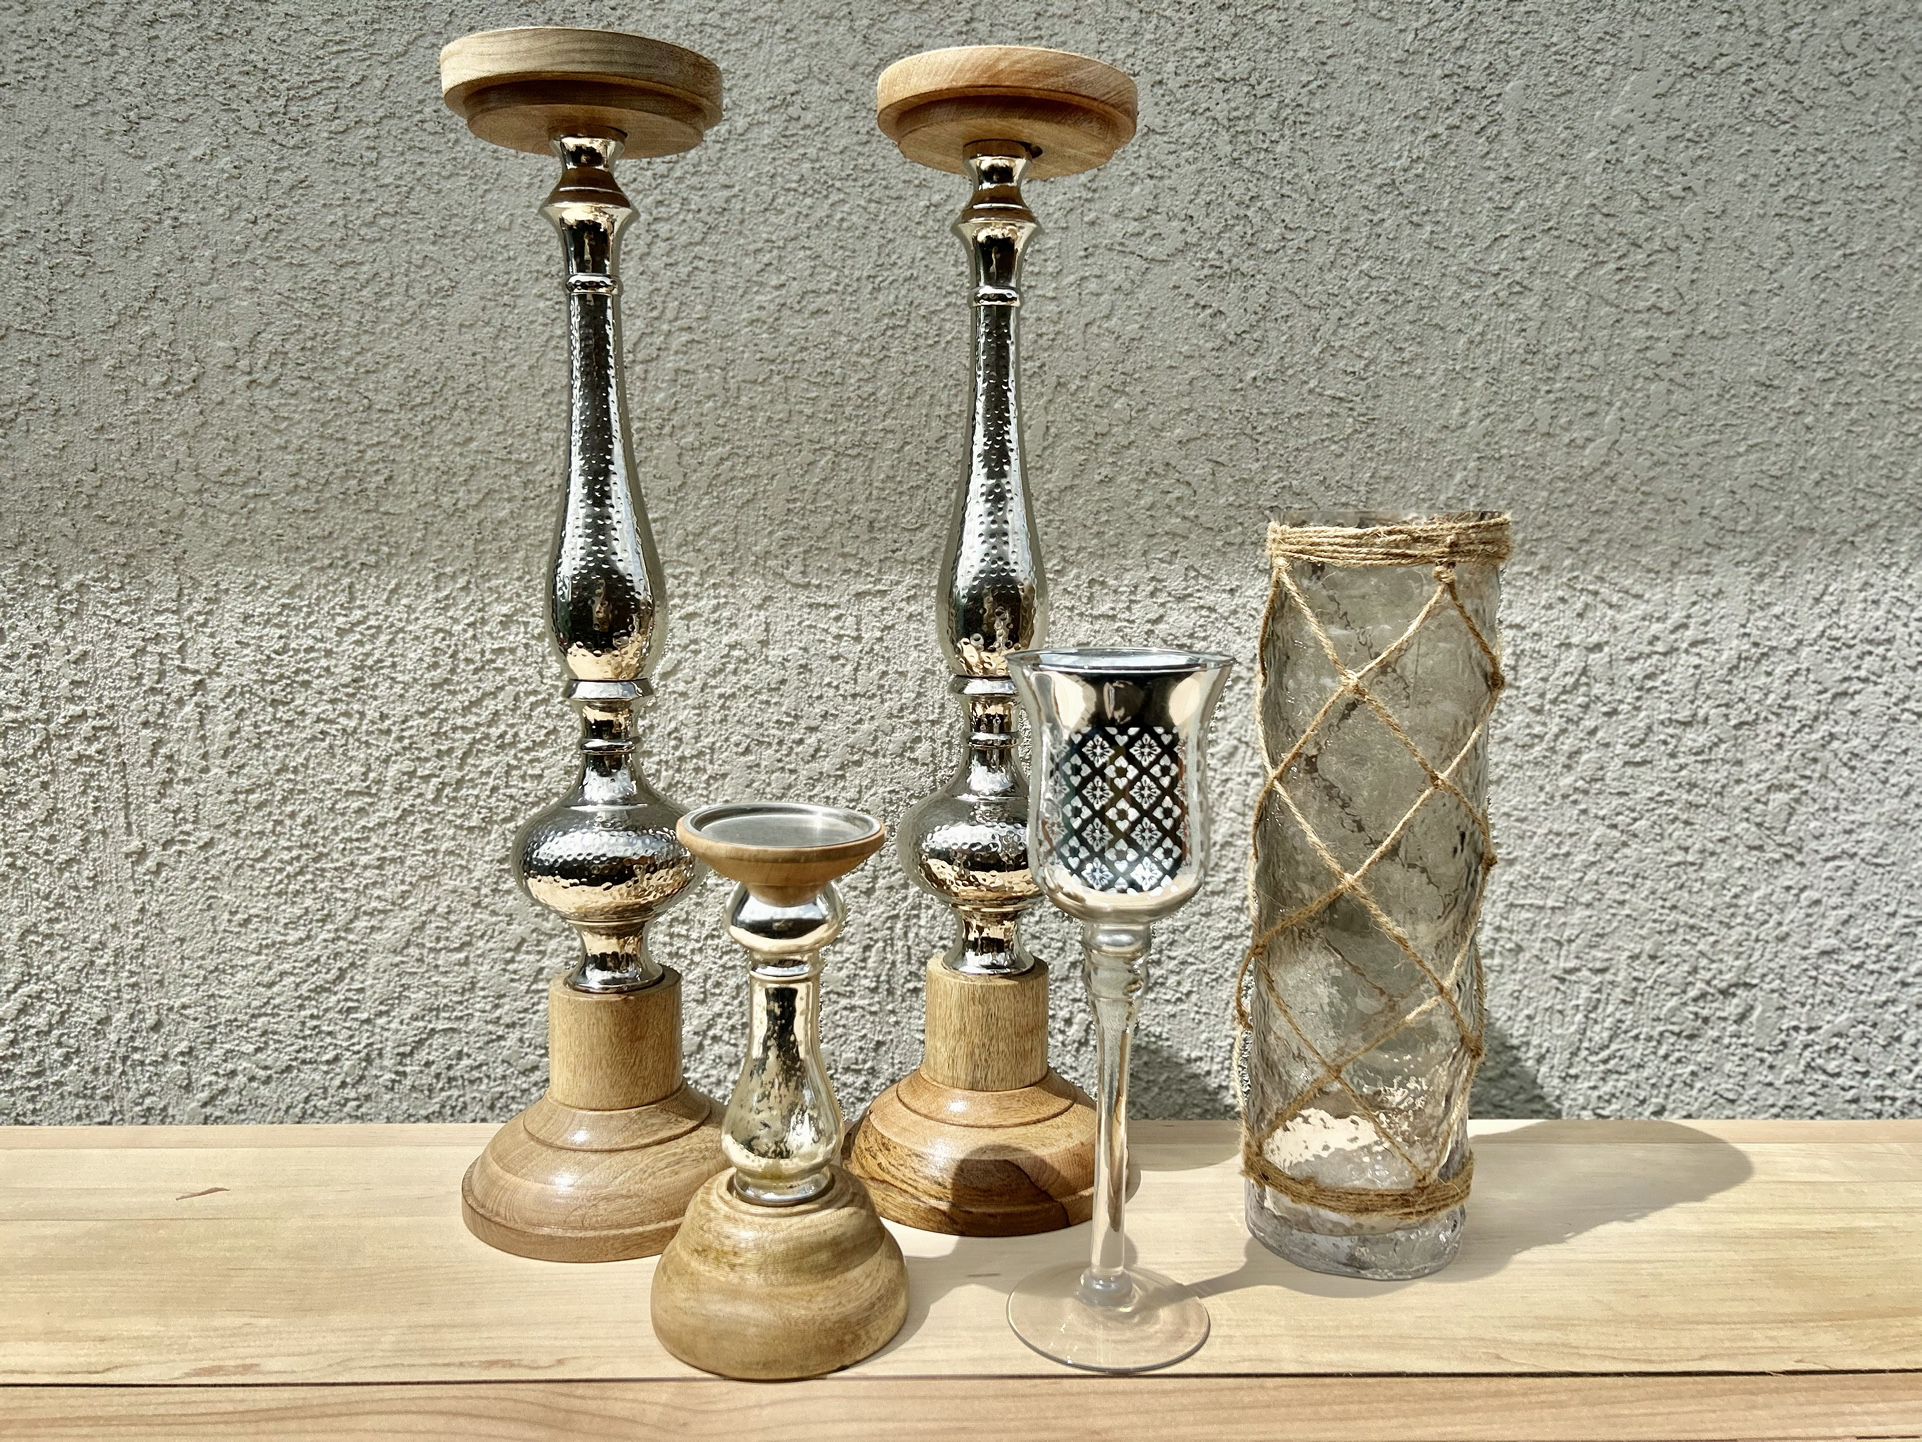 5-piece Candle Holder Lot (all for $25)